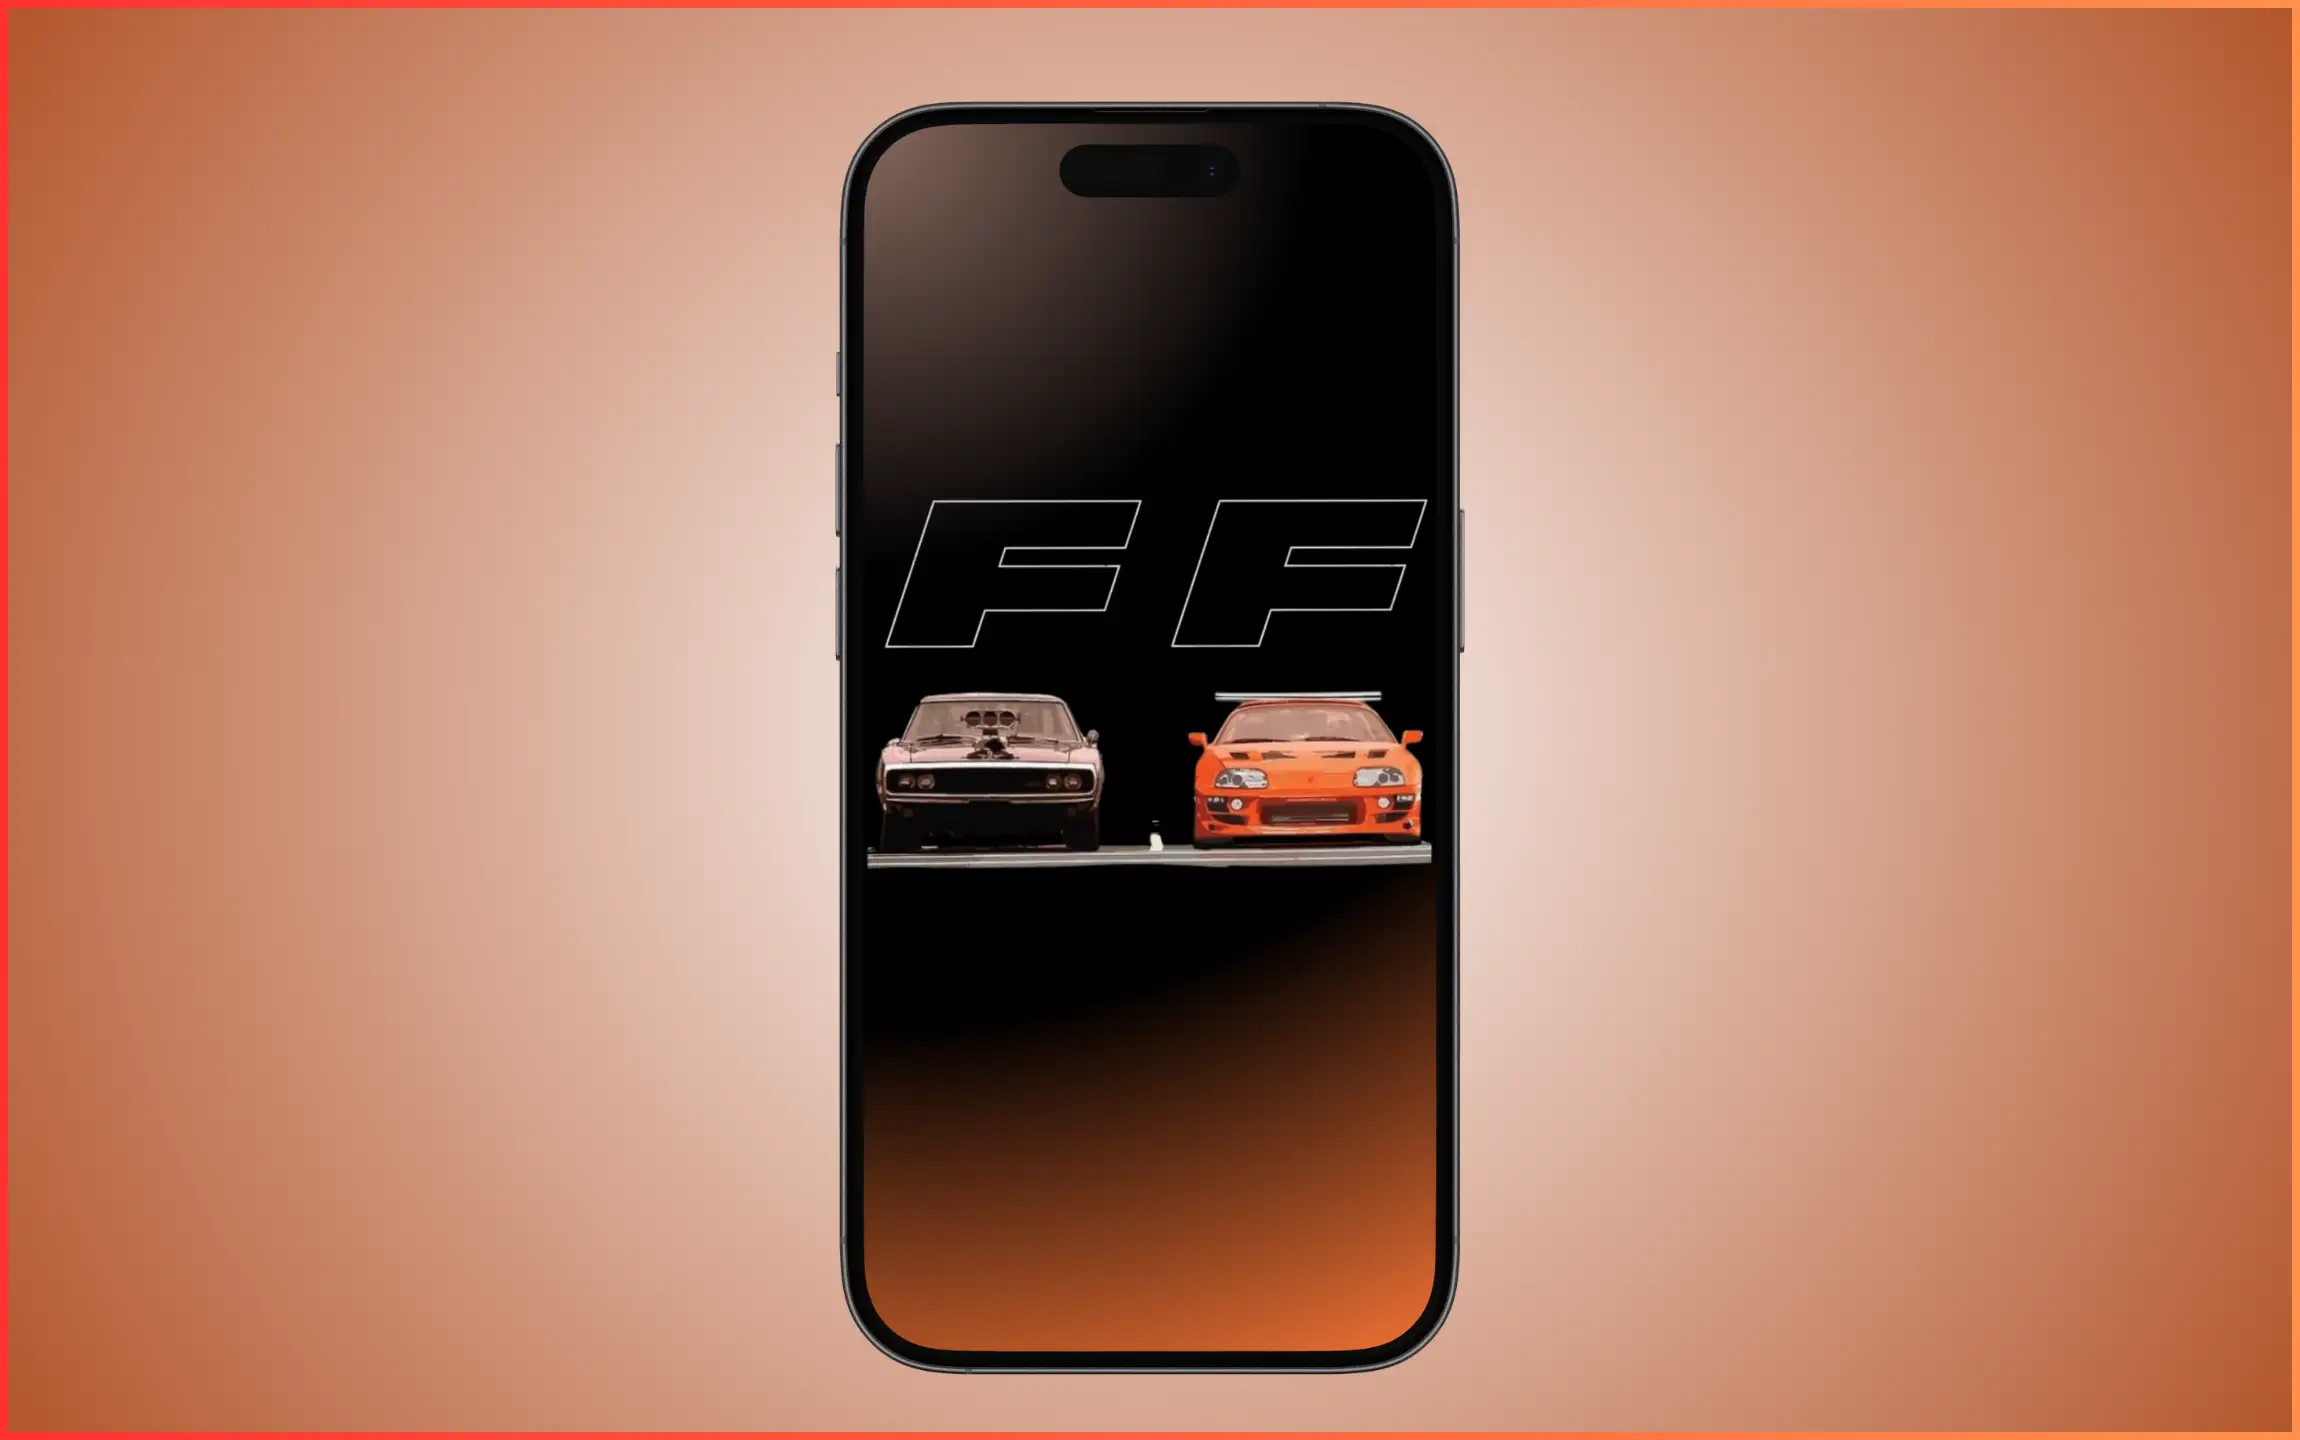 Toyota Supra Fast and Furious Wallpaper for iPhone